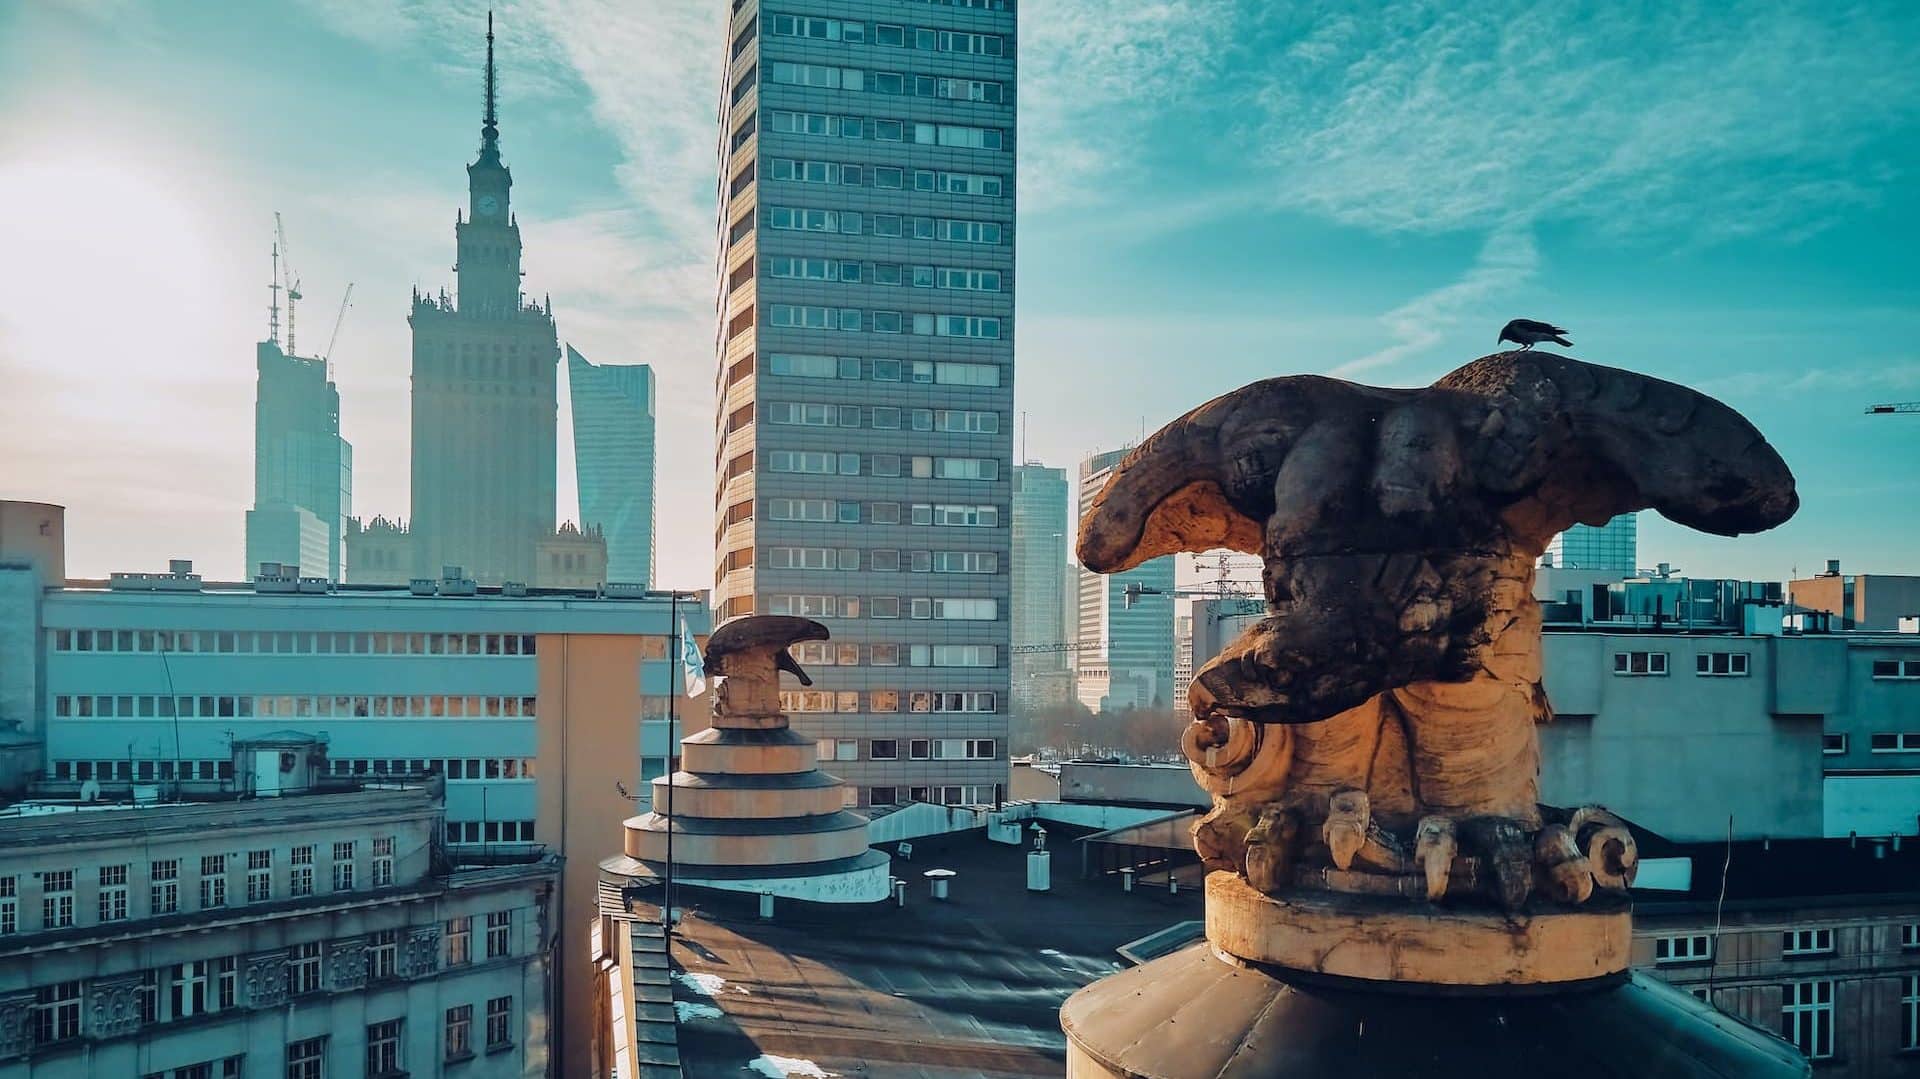 Śródmieście is the vibrant heart of Warsaw, offering a mix of historical sights, modern architecture, and bustling streets. This central district is home to numerous tourist attractions, including the Royal Castle, Wilanów Palace, and Lazienki Park.